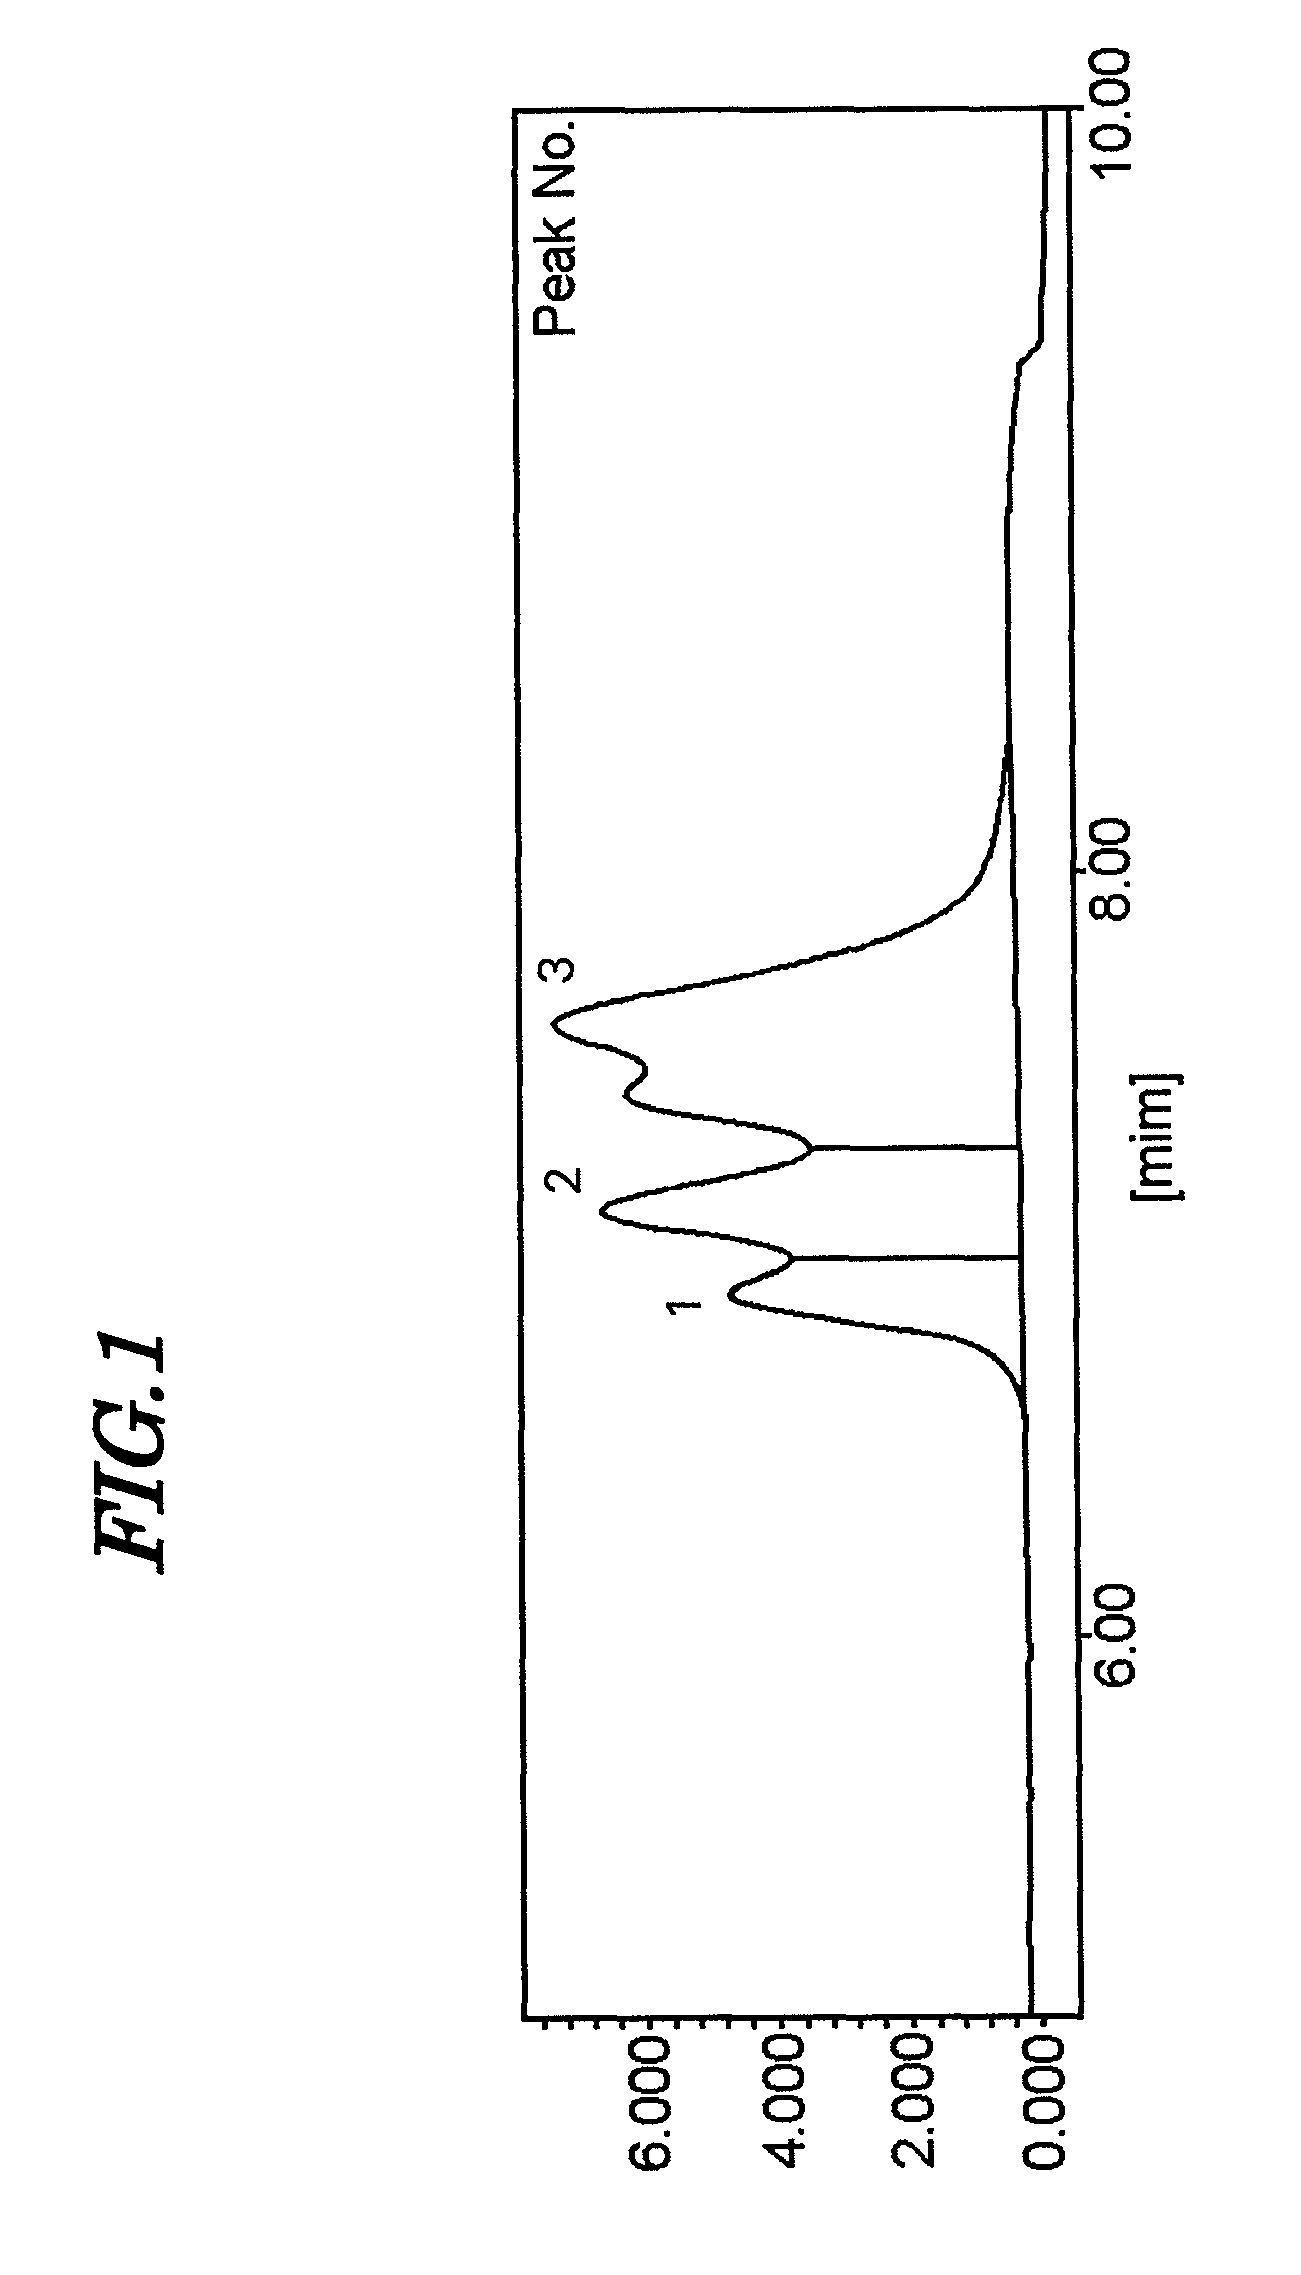 Conjugated diene polymer, method for producing conjugated diene polymer, and conjugated diene polymer composition